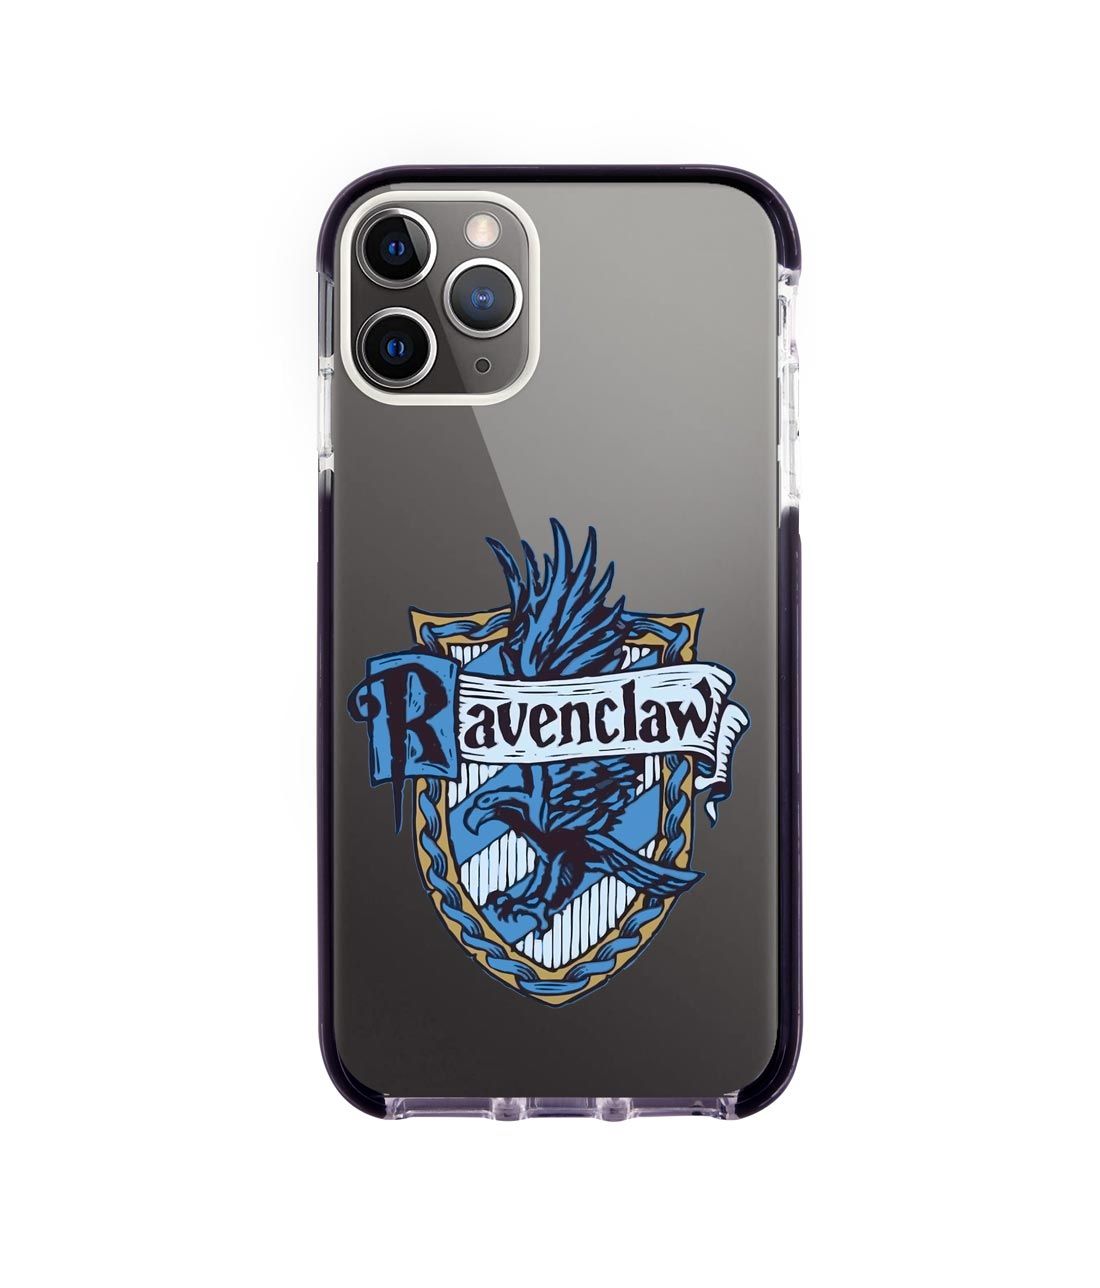 Crest Ravenclaw - Extreme Phone Case for iPhone 11 Pro